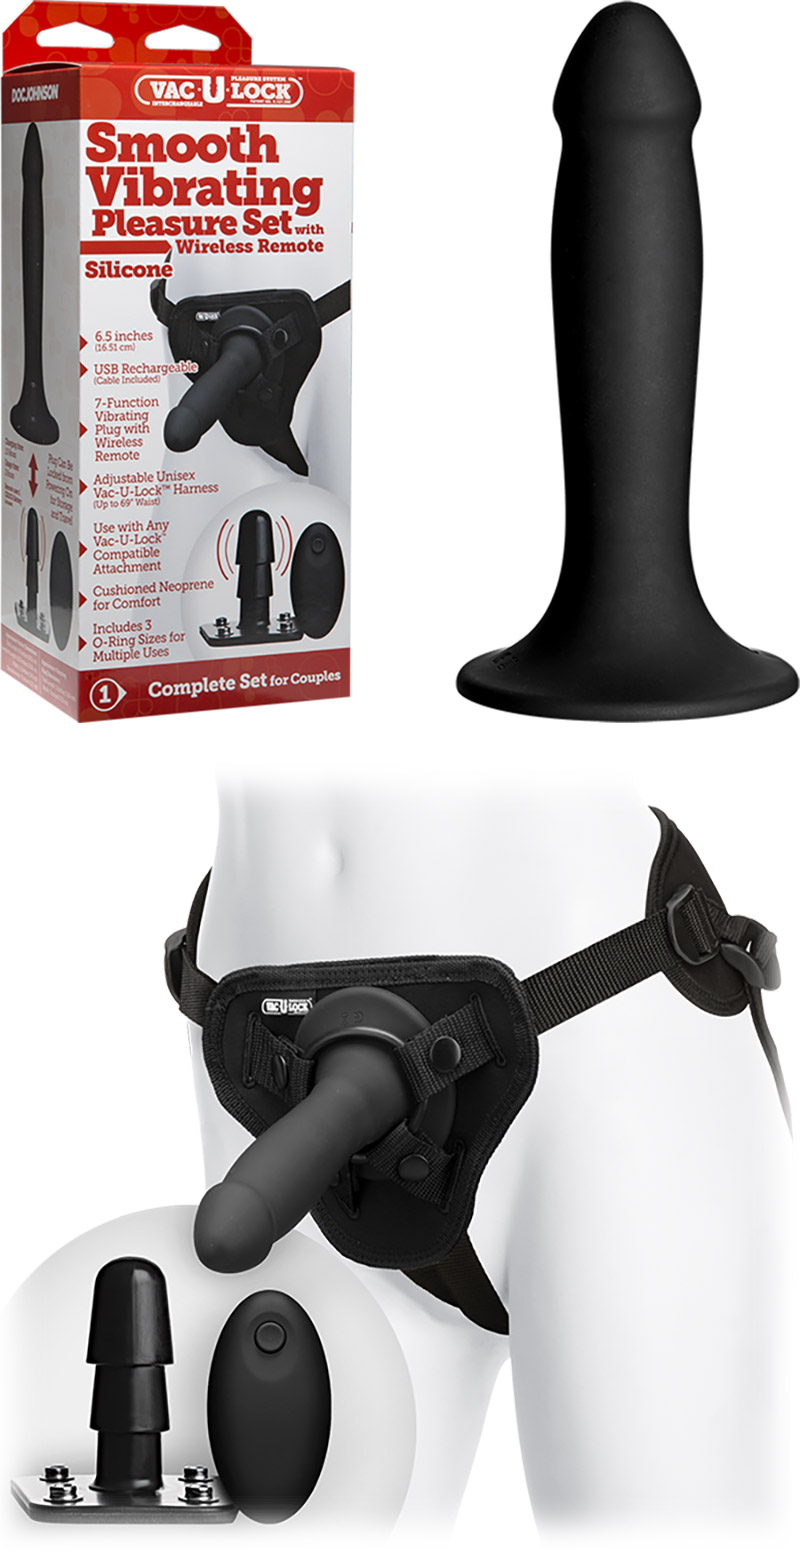 Doc Johnson Smooth vibrating & remote-controlled strap-on dildo